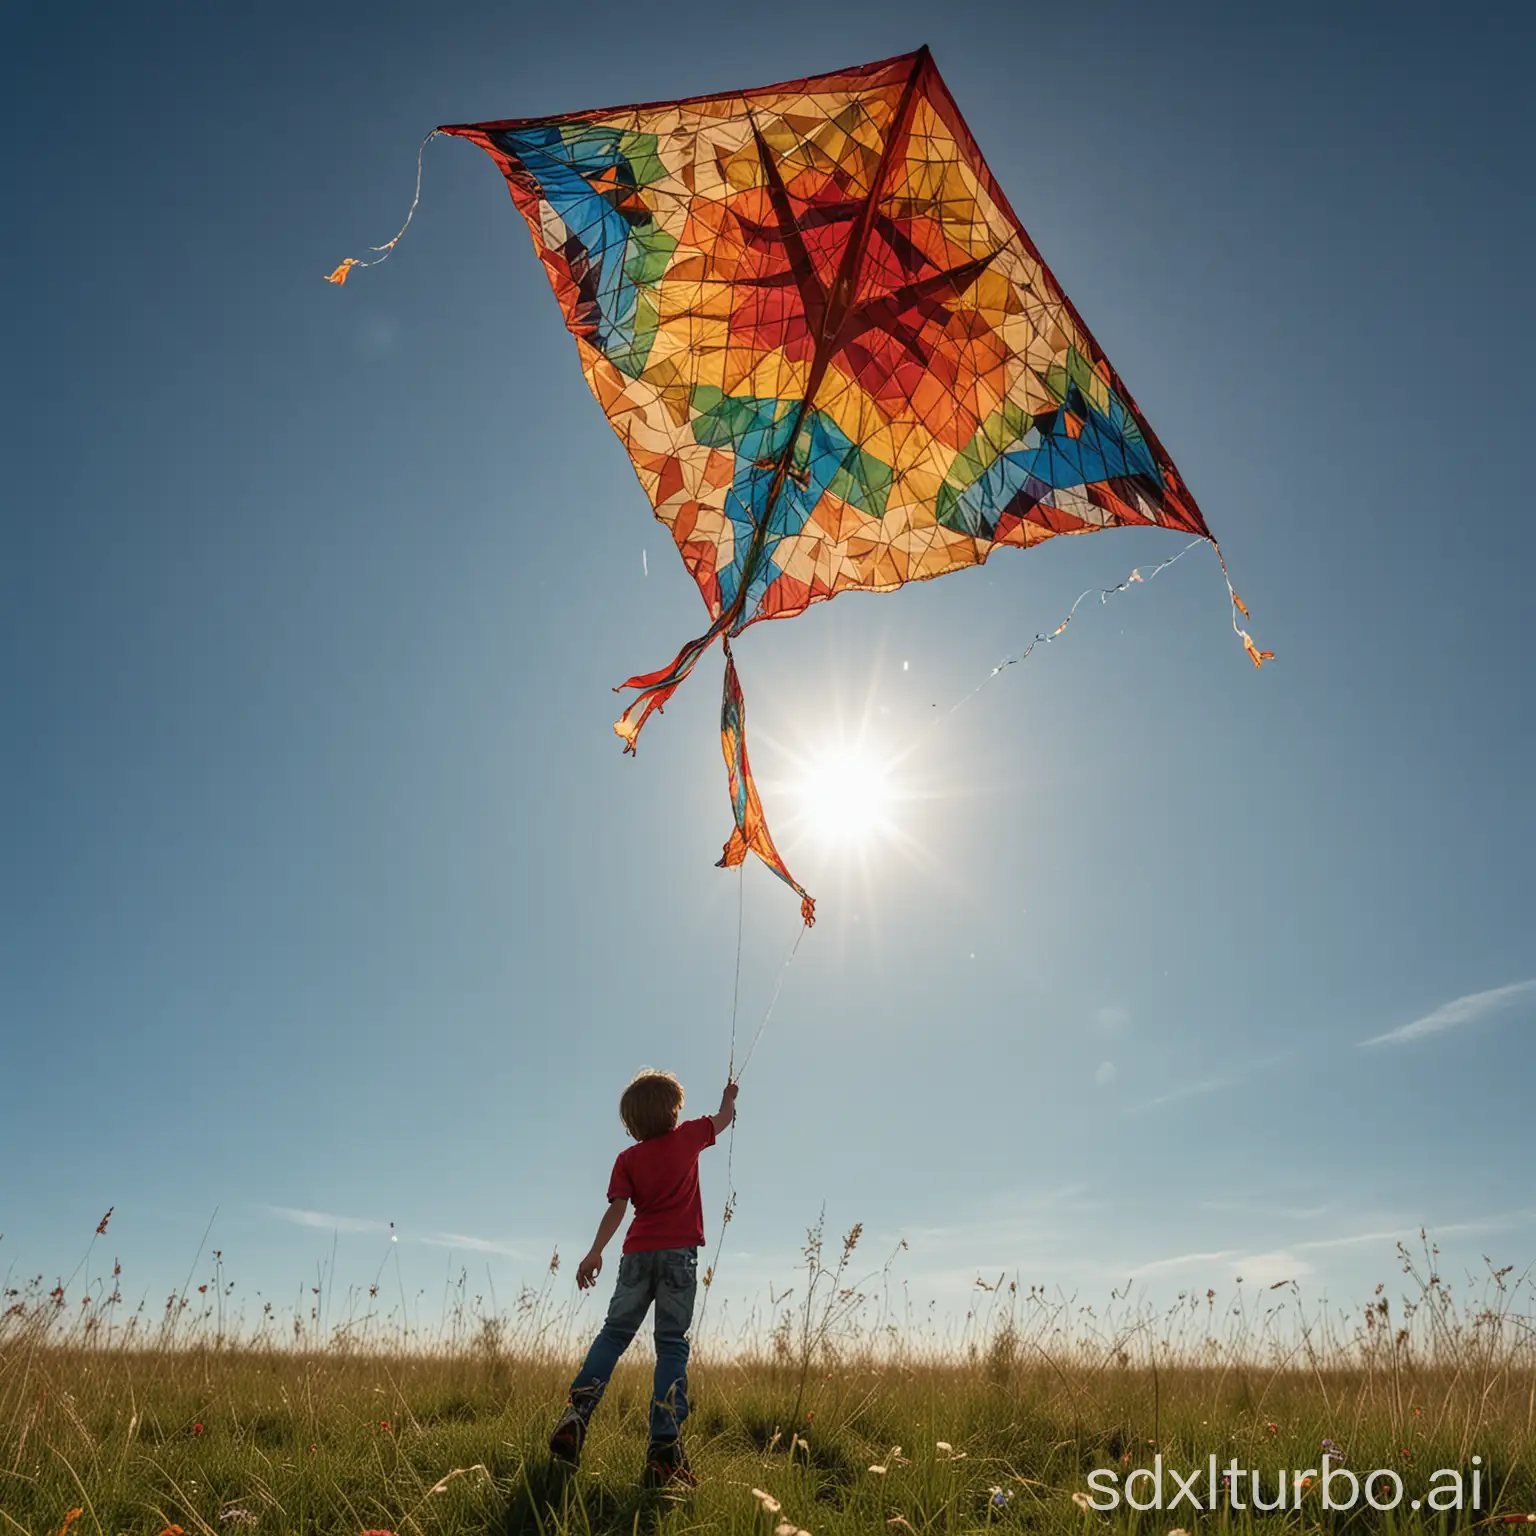 Children launch a multicolored kite into the clear azure sky, sunlight floods everything around with warm light, creating a feeling of freedom and joy, thanks to the detailed stitching of the kite fabric and intricate patterns of bright hues, made using Nikon D850 camera